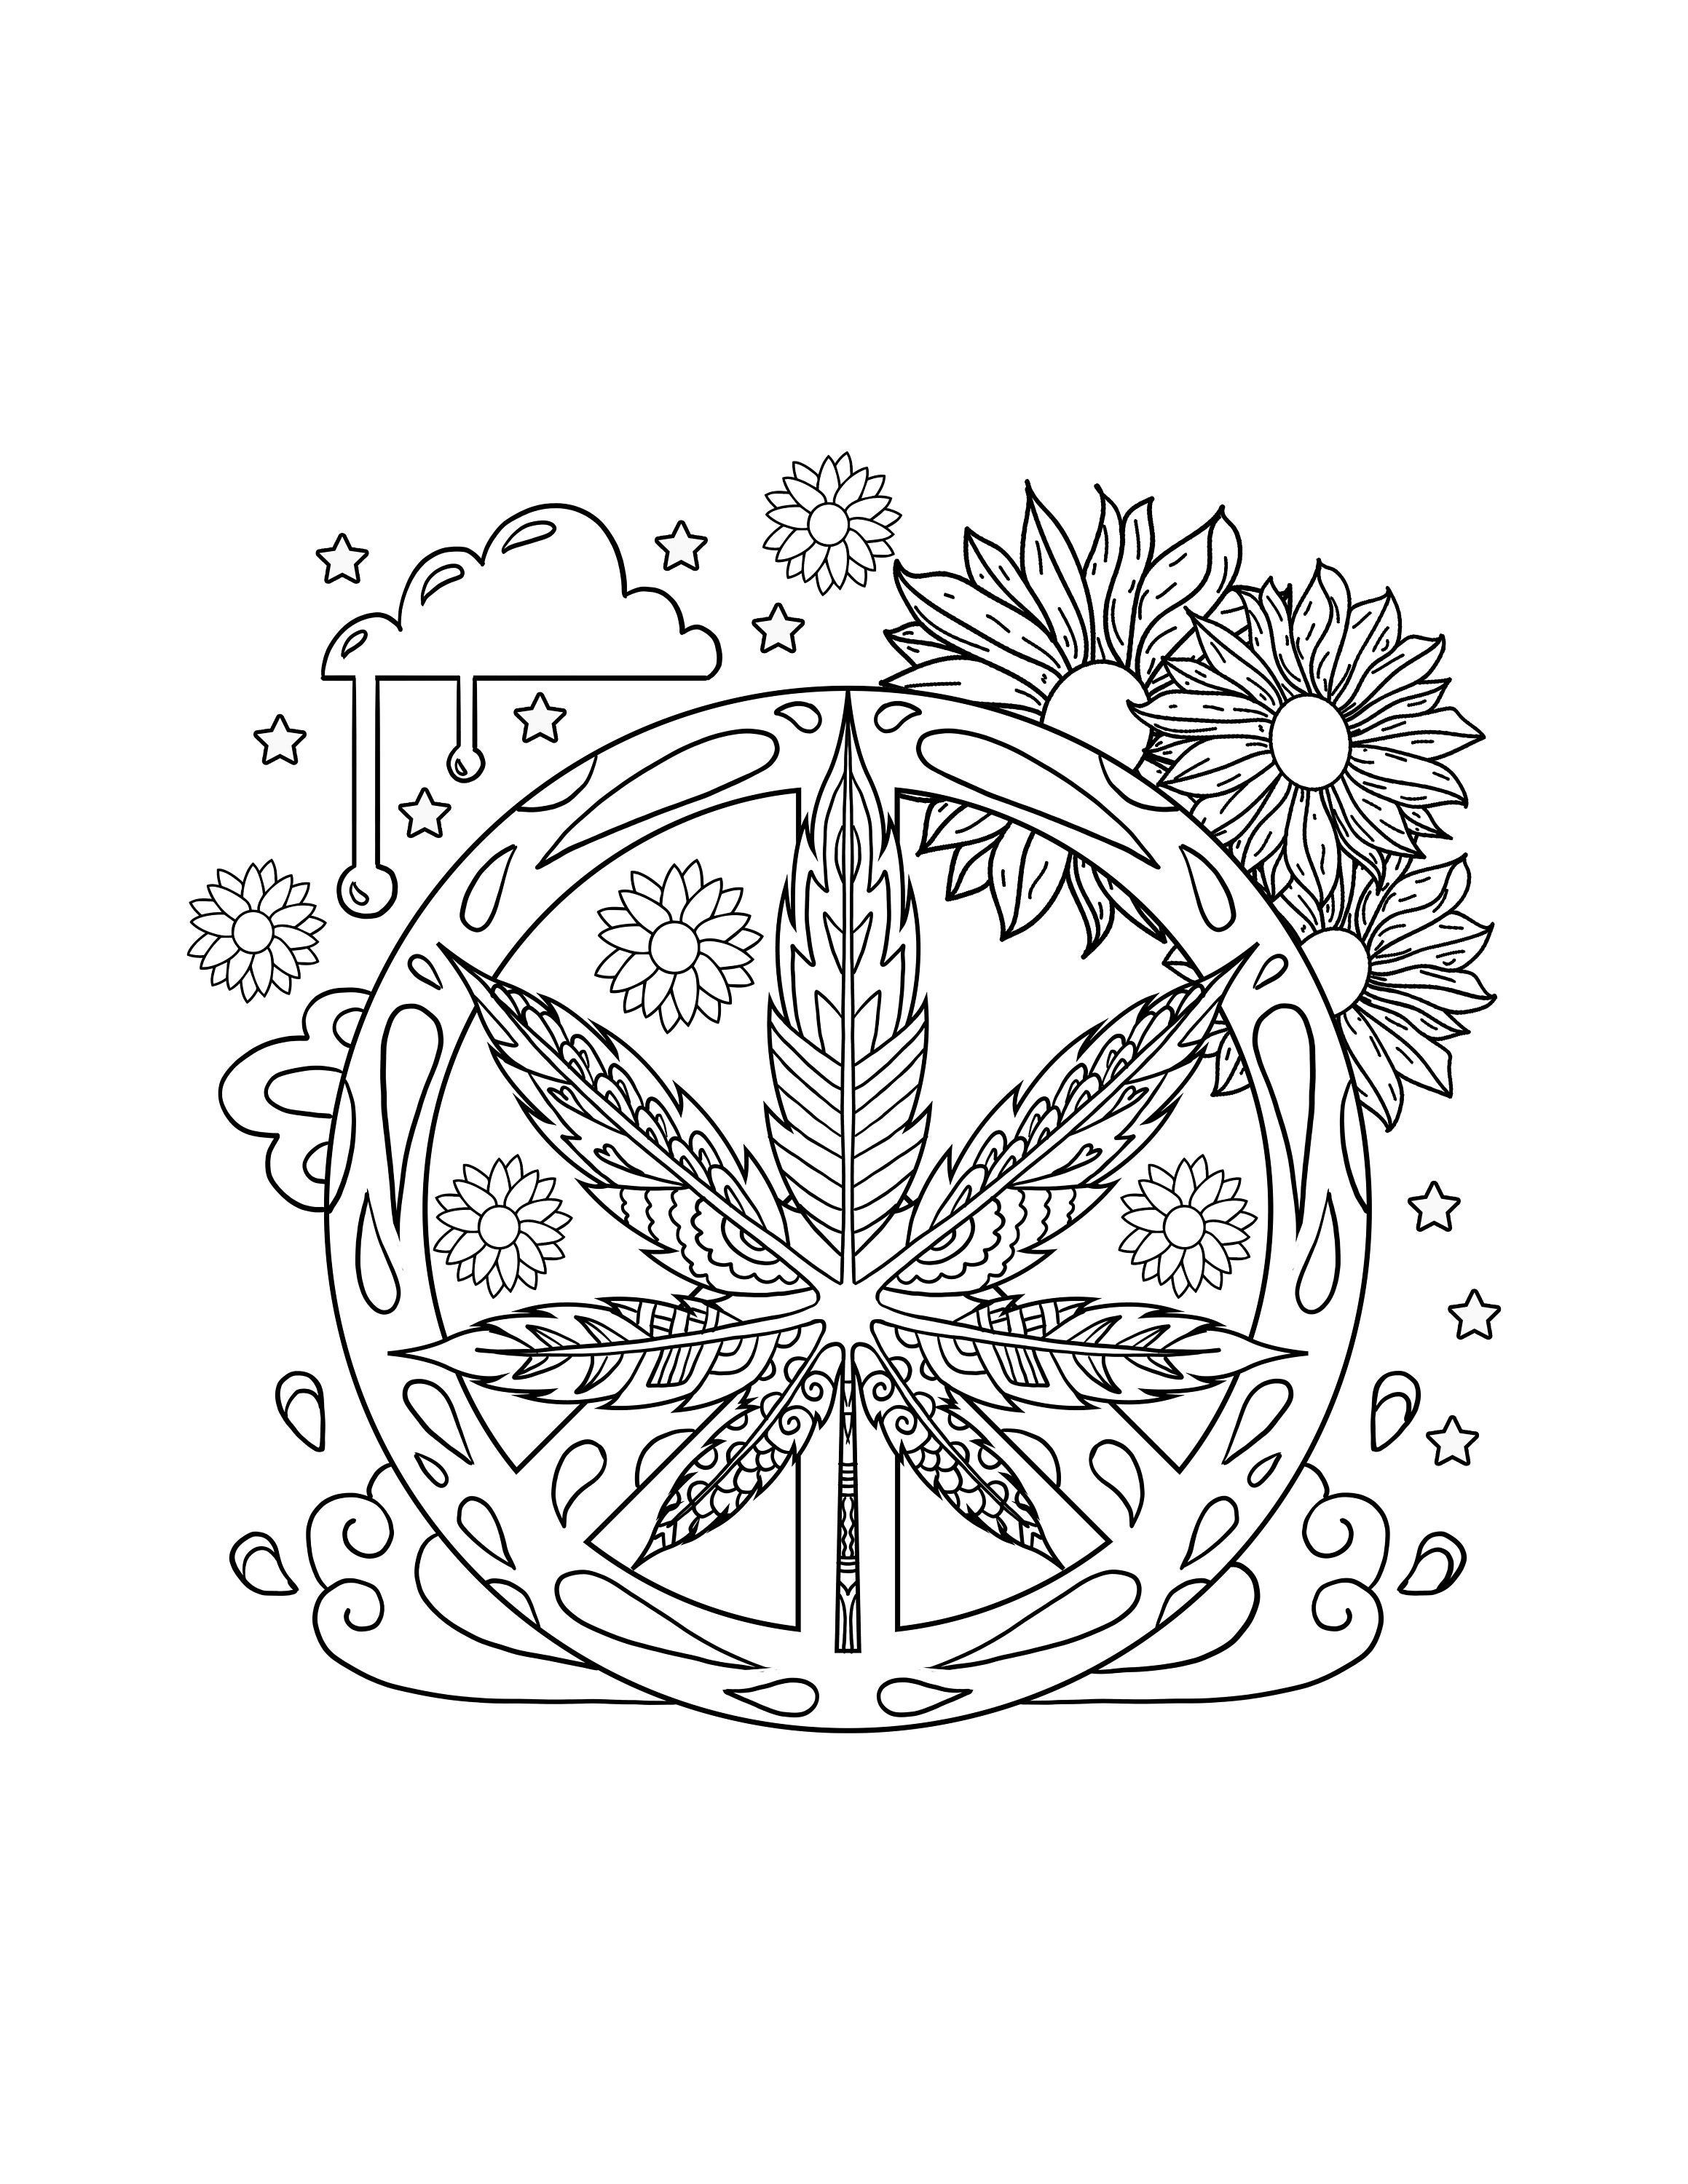 10 Mind-Blowing Stoner Coloring Pages Printable That Will Blow Your ...